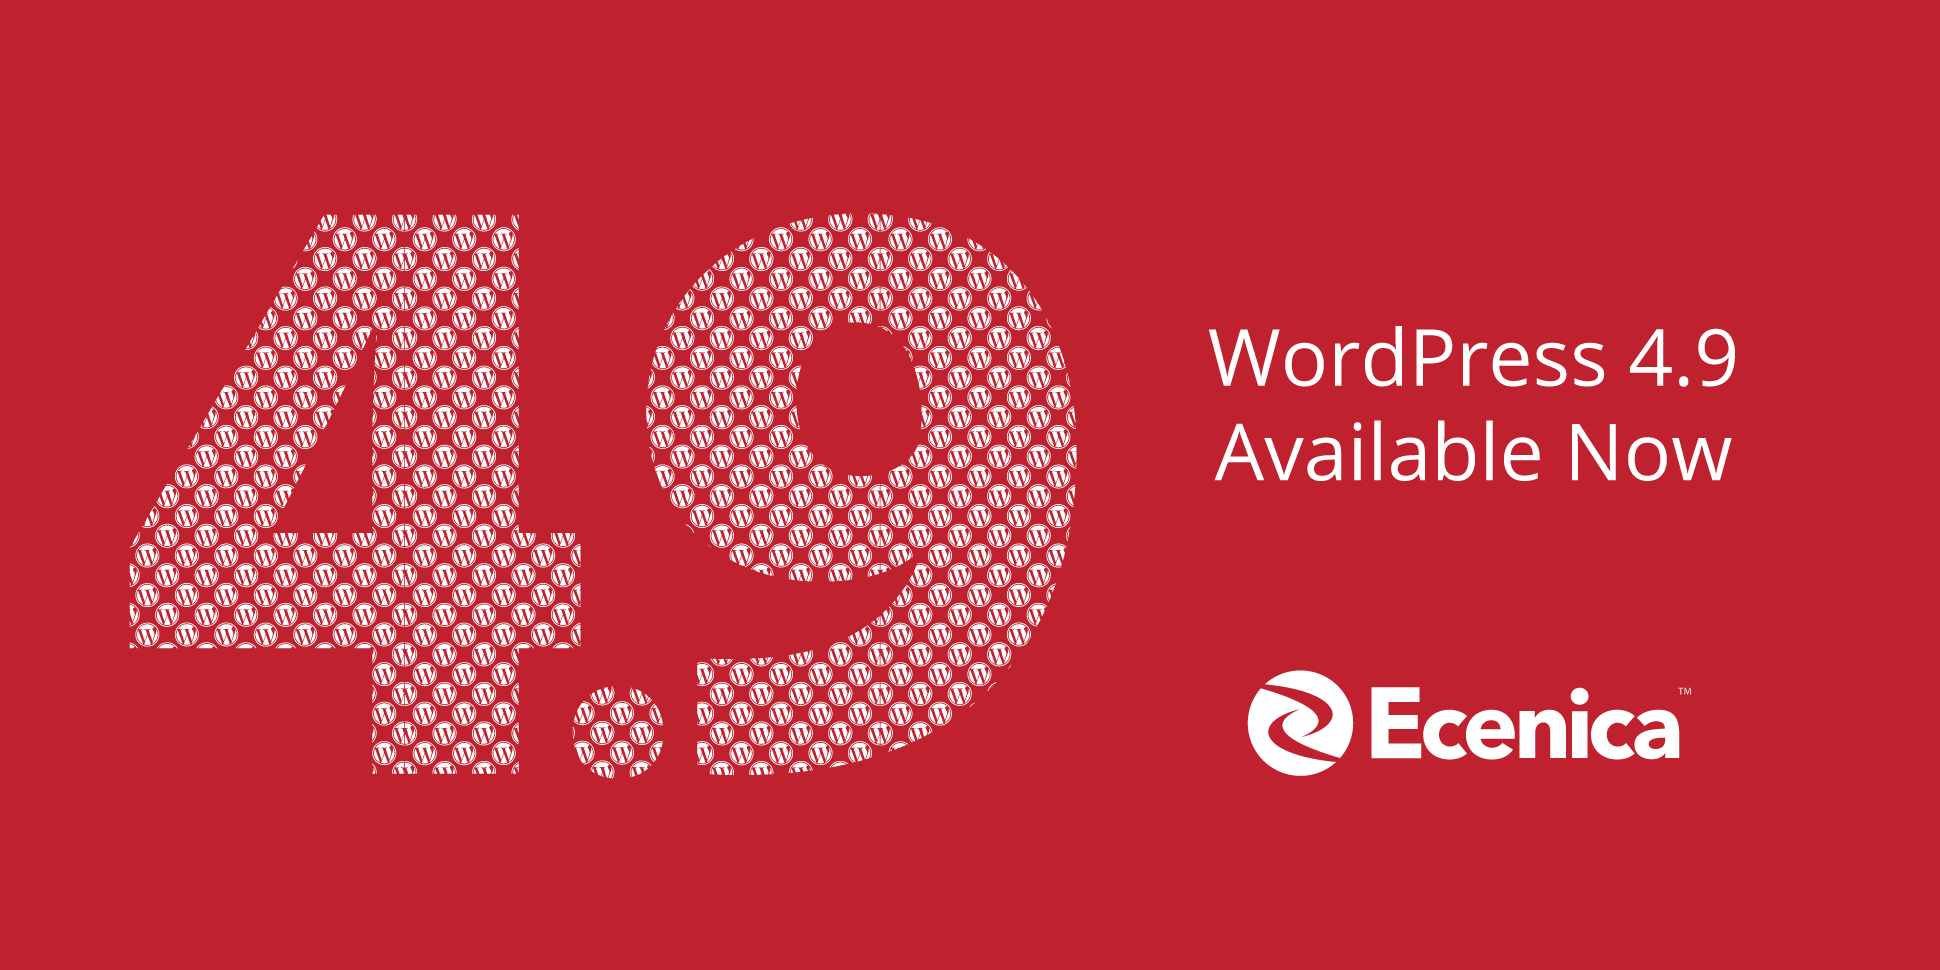 WordPress 4.9 Is Now Available at Ecenica